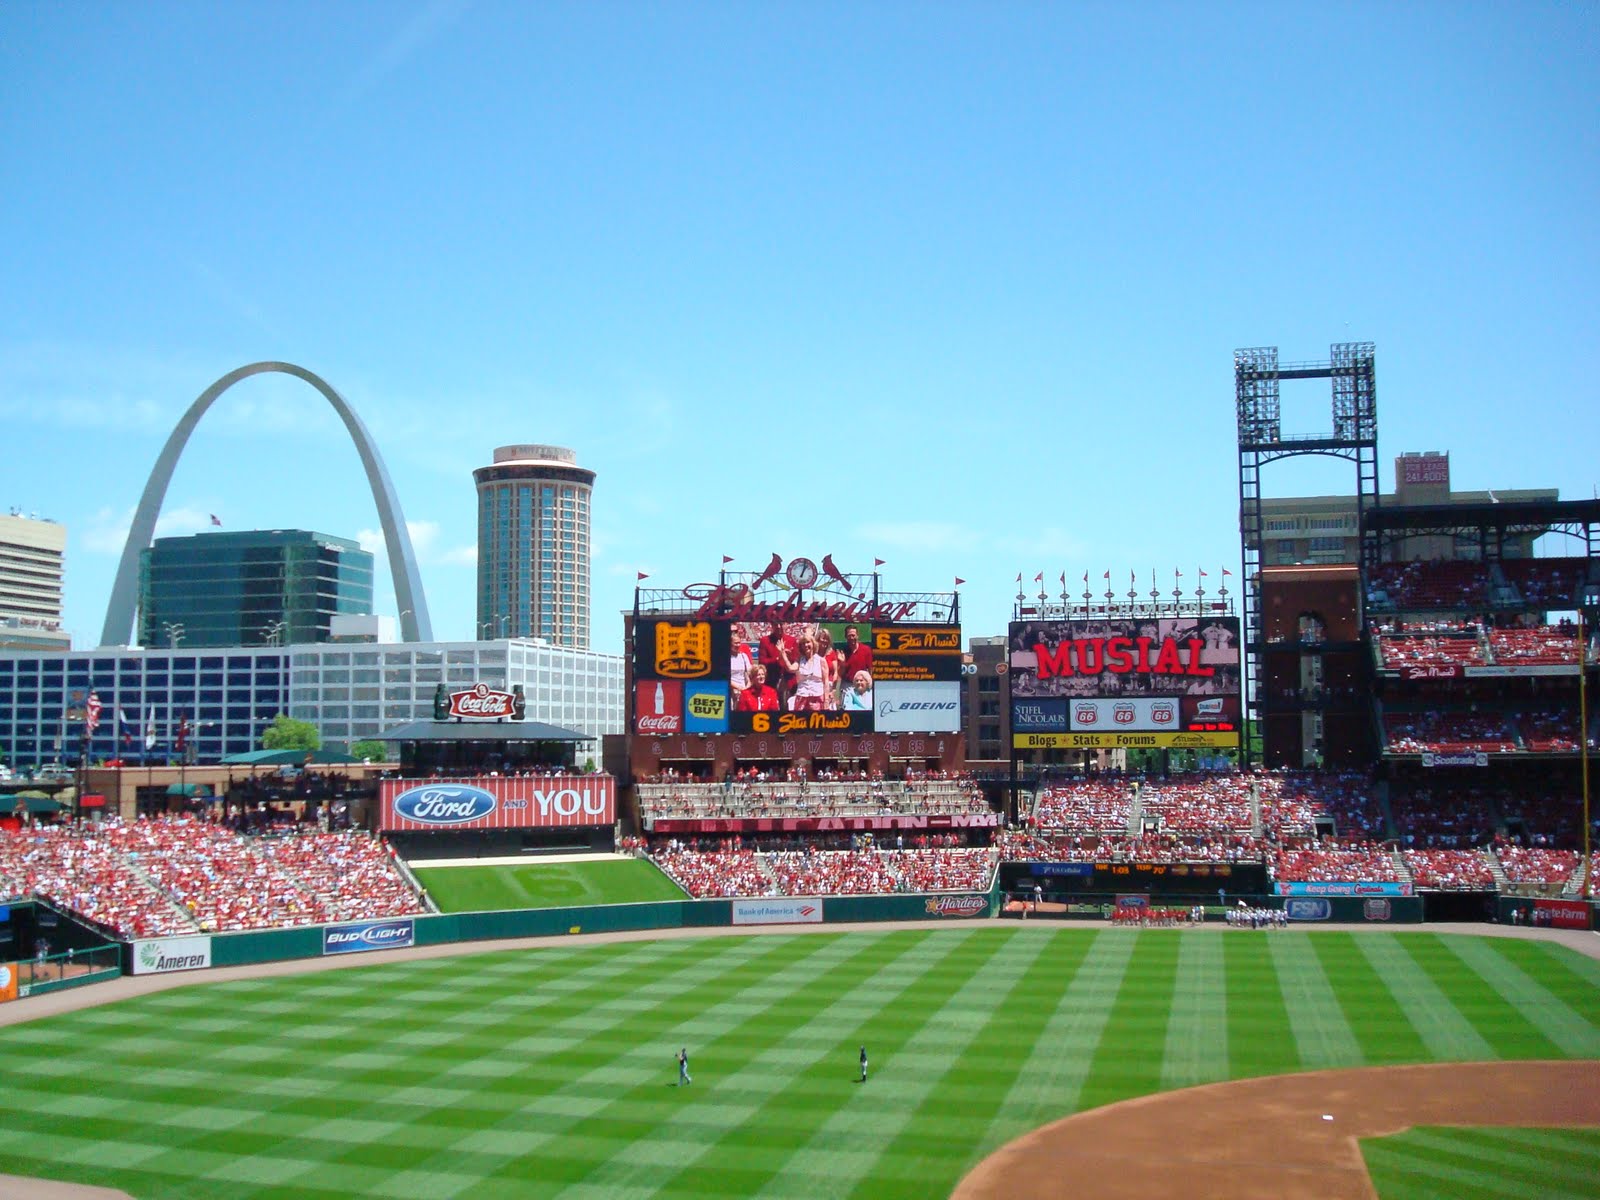 Top-of-the-Arch: ST. LOUIS CARDINALS&#39; HOME OPENER